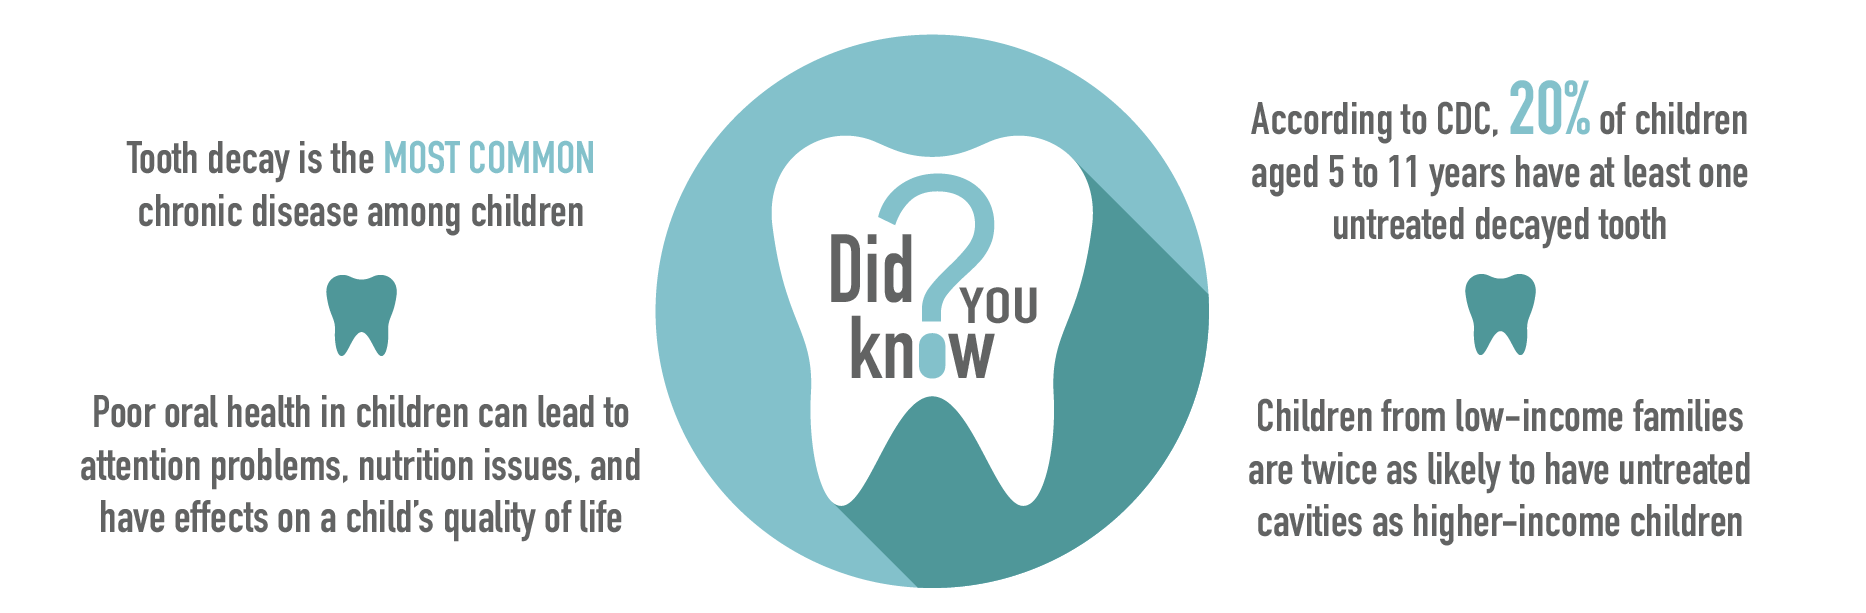 Did you know?
Tooth decay is the most common chronic disease among children